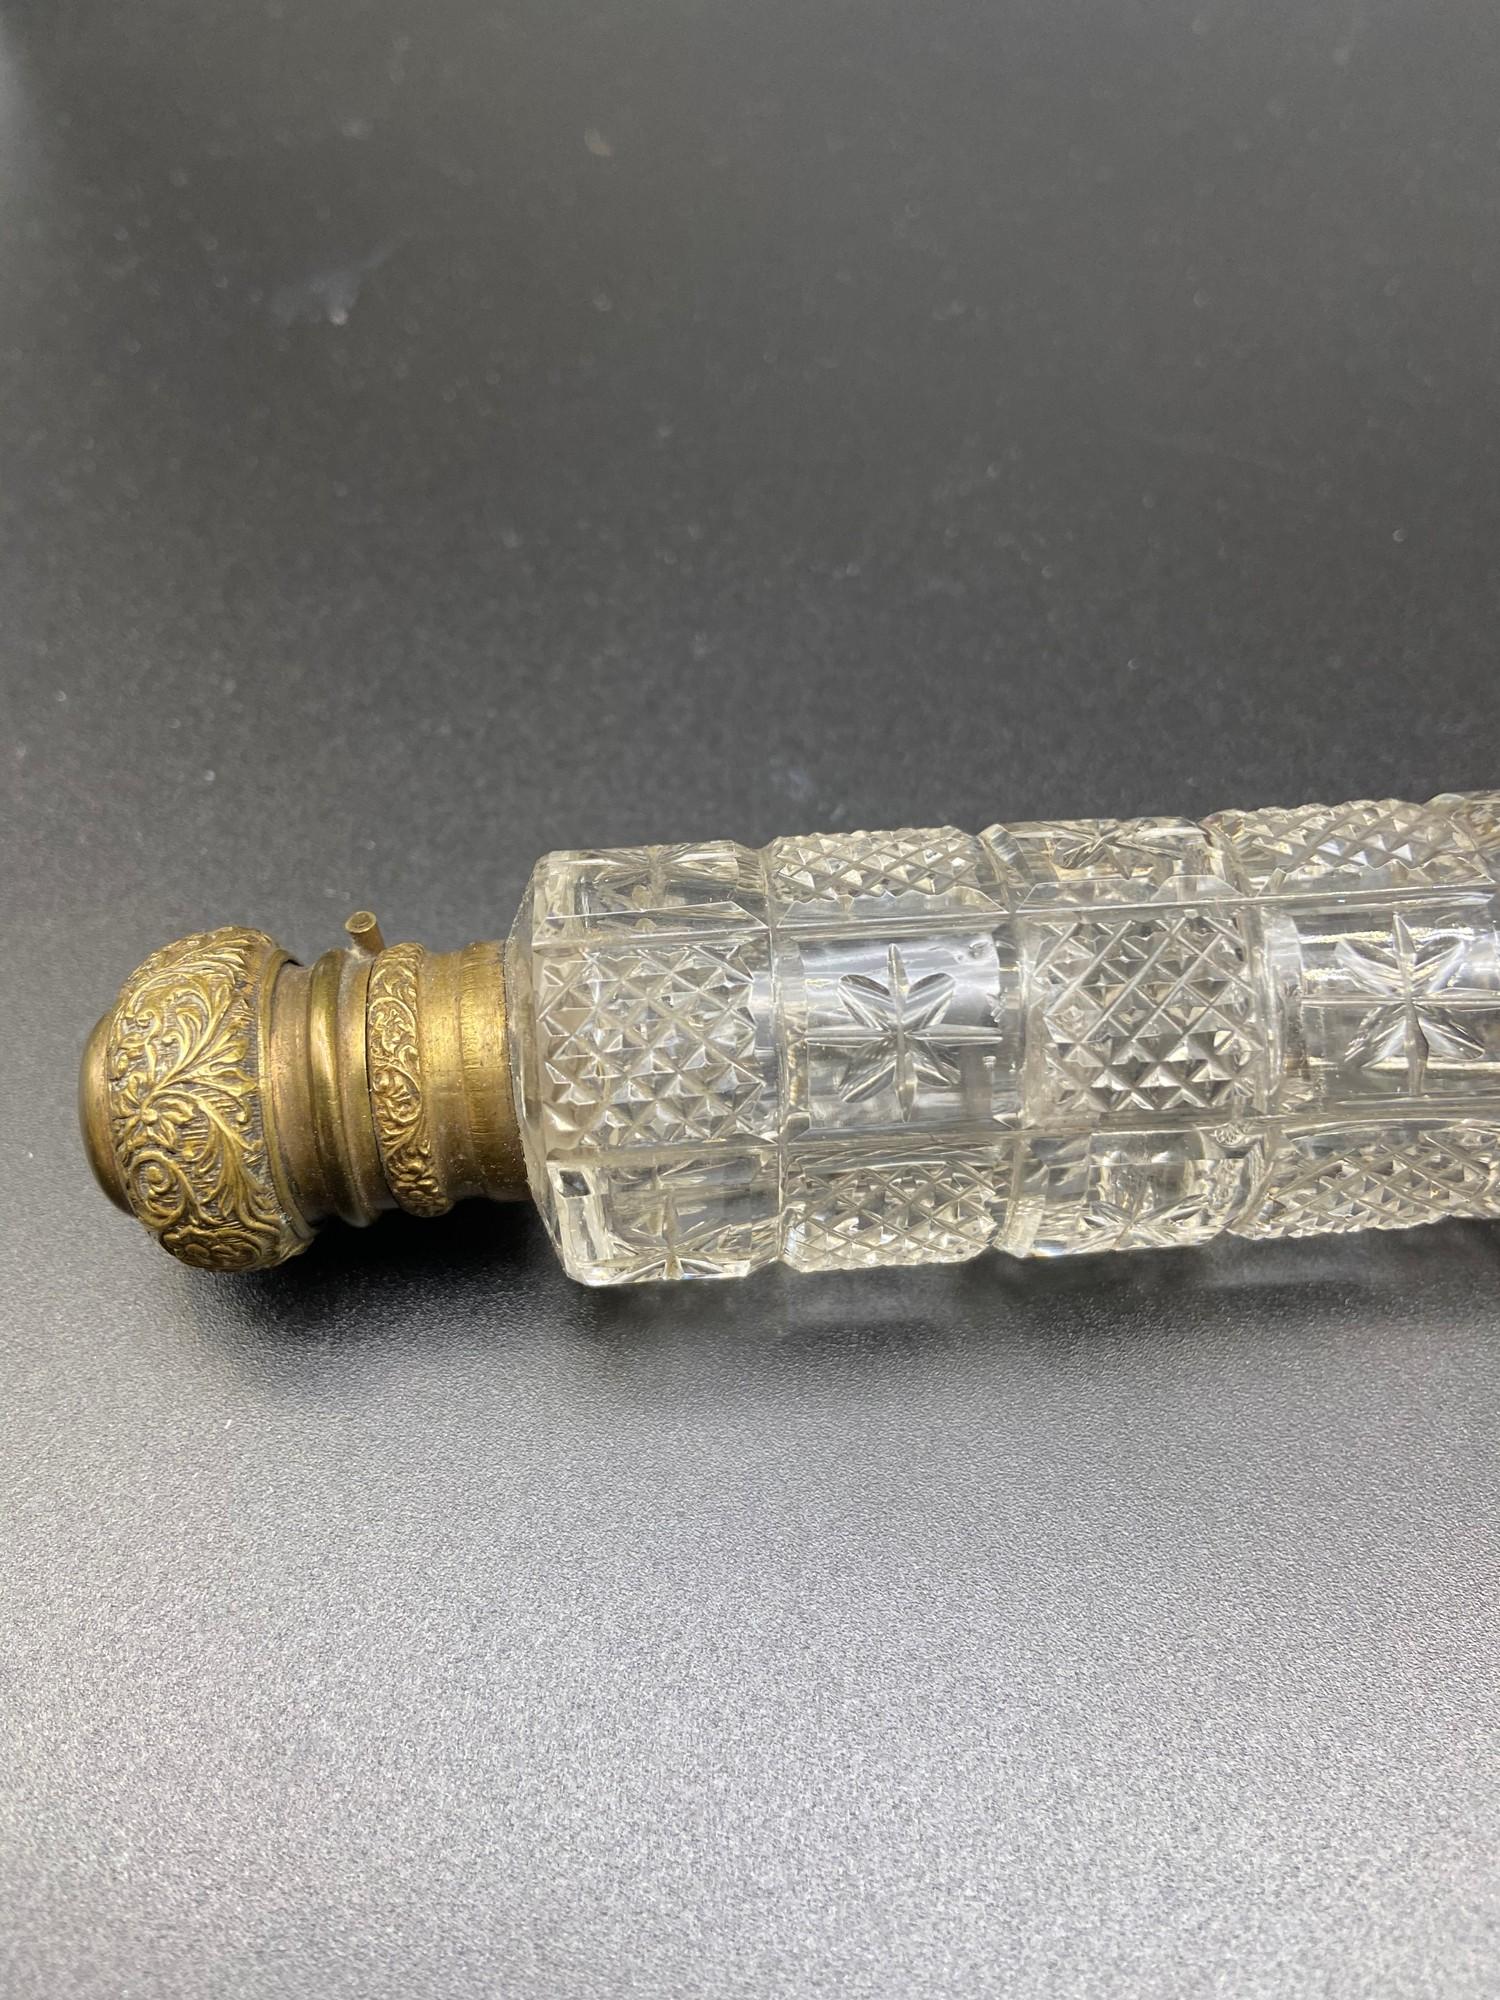 Antique double ended perfume bottle. Designed with two gilt metal tops and cut glass body. Comes - Image 3 of 8